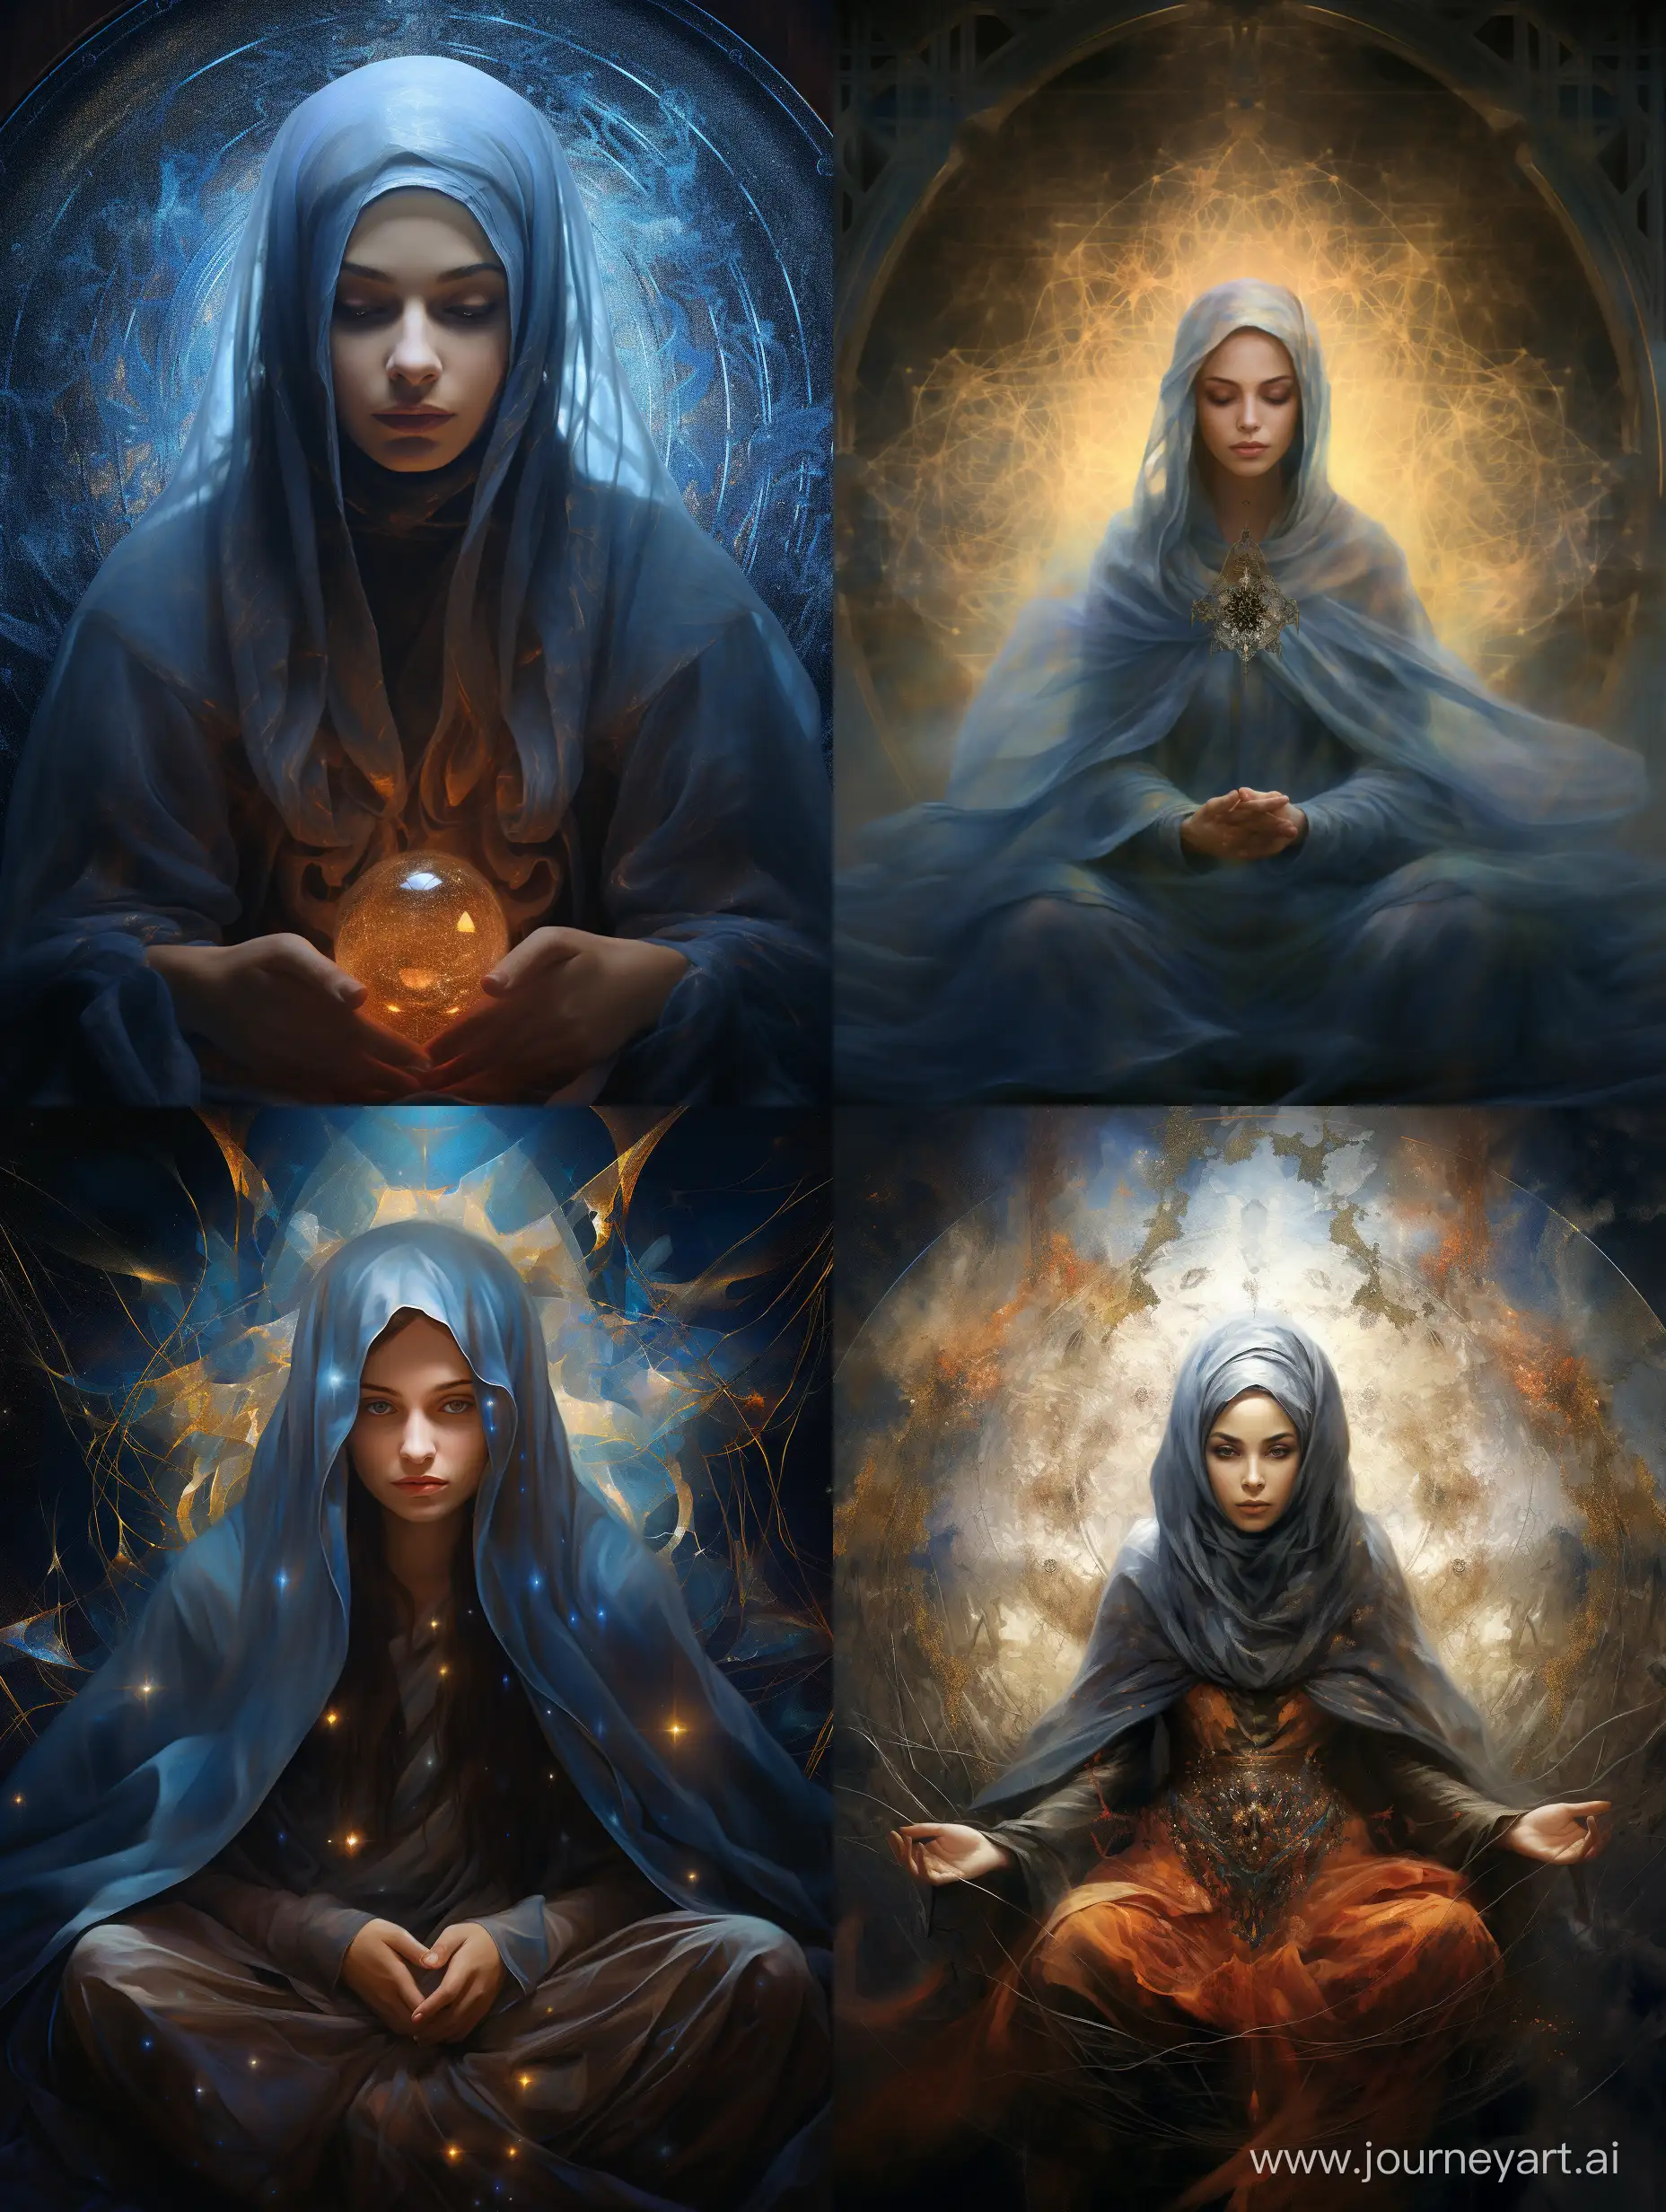 Mystical-Meditation-in-Motion-Woman-in-Hijab-Engages-in-Tranquil-Art